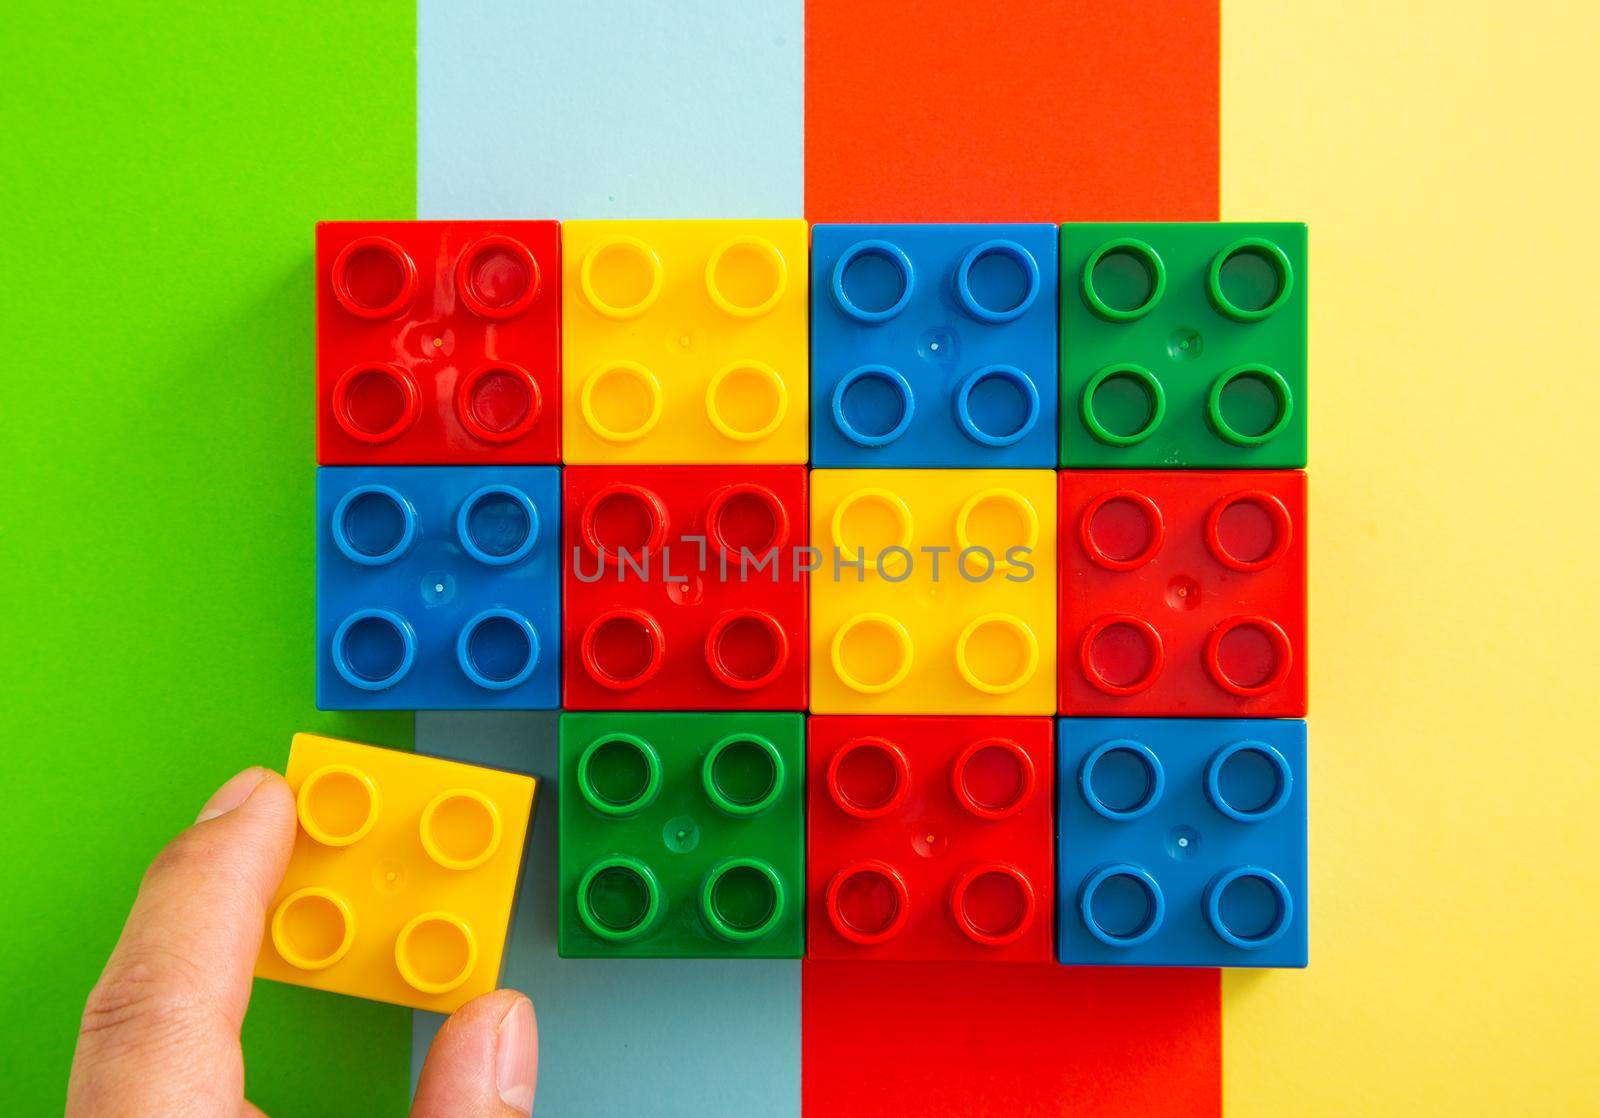 Colorful plastic block on colorful background. (Flat Lay)